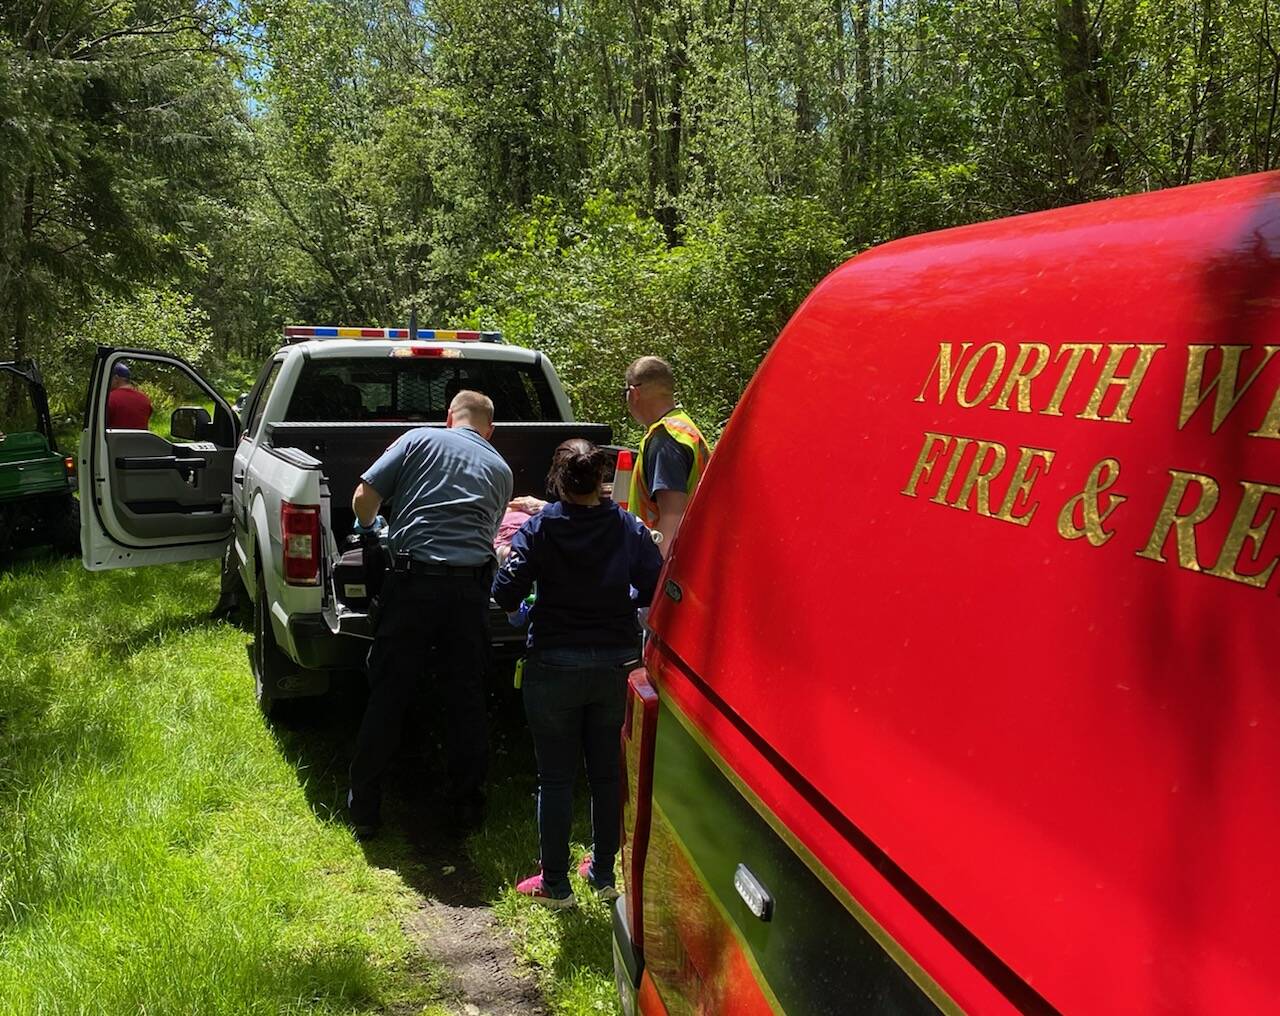 North Whidbey Fire and Rescue photo
First responders load a woman with potential injuries into a vehicle after she was thrown from a horse Thursday morning.